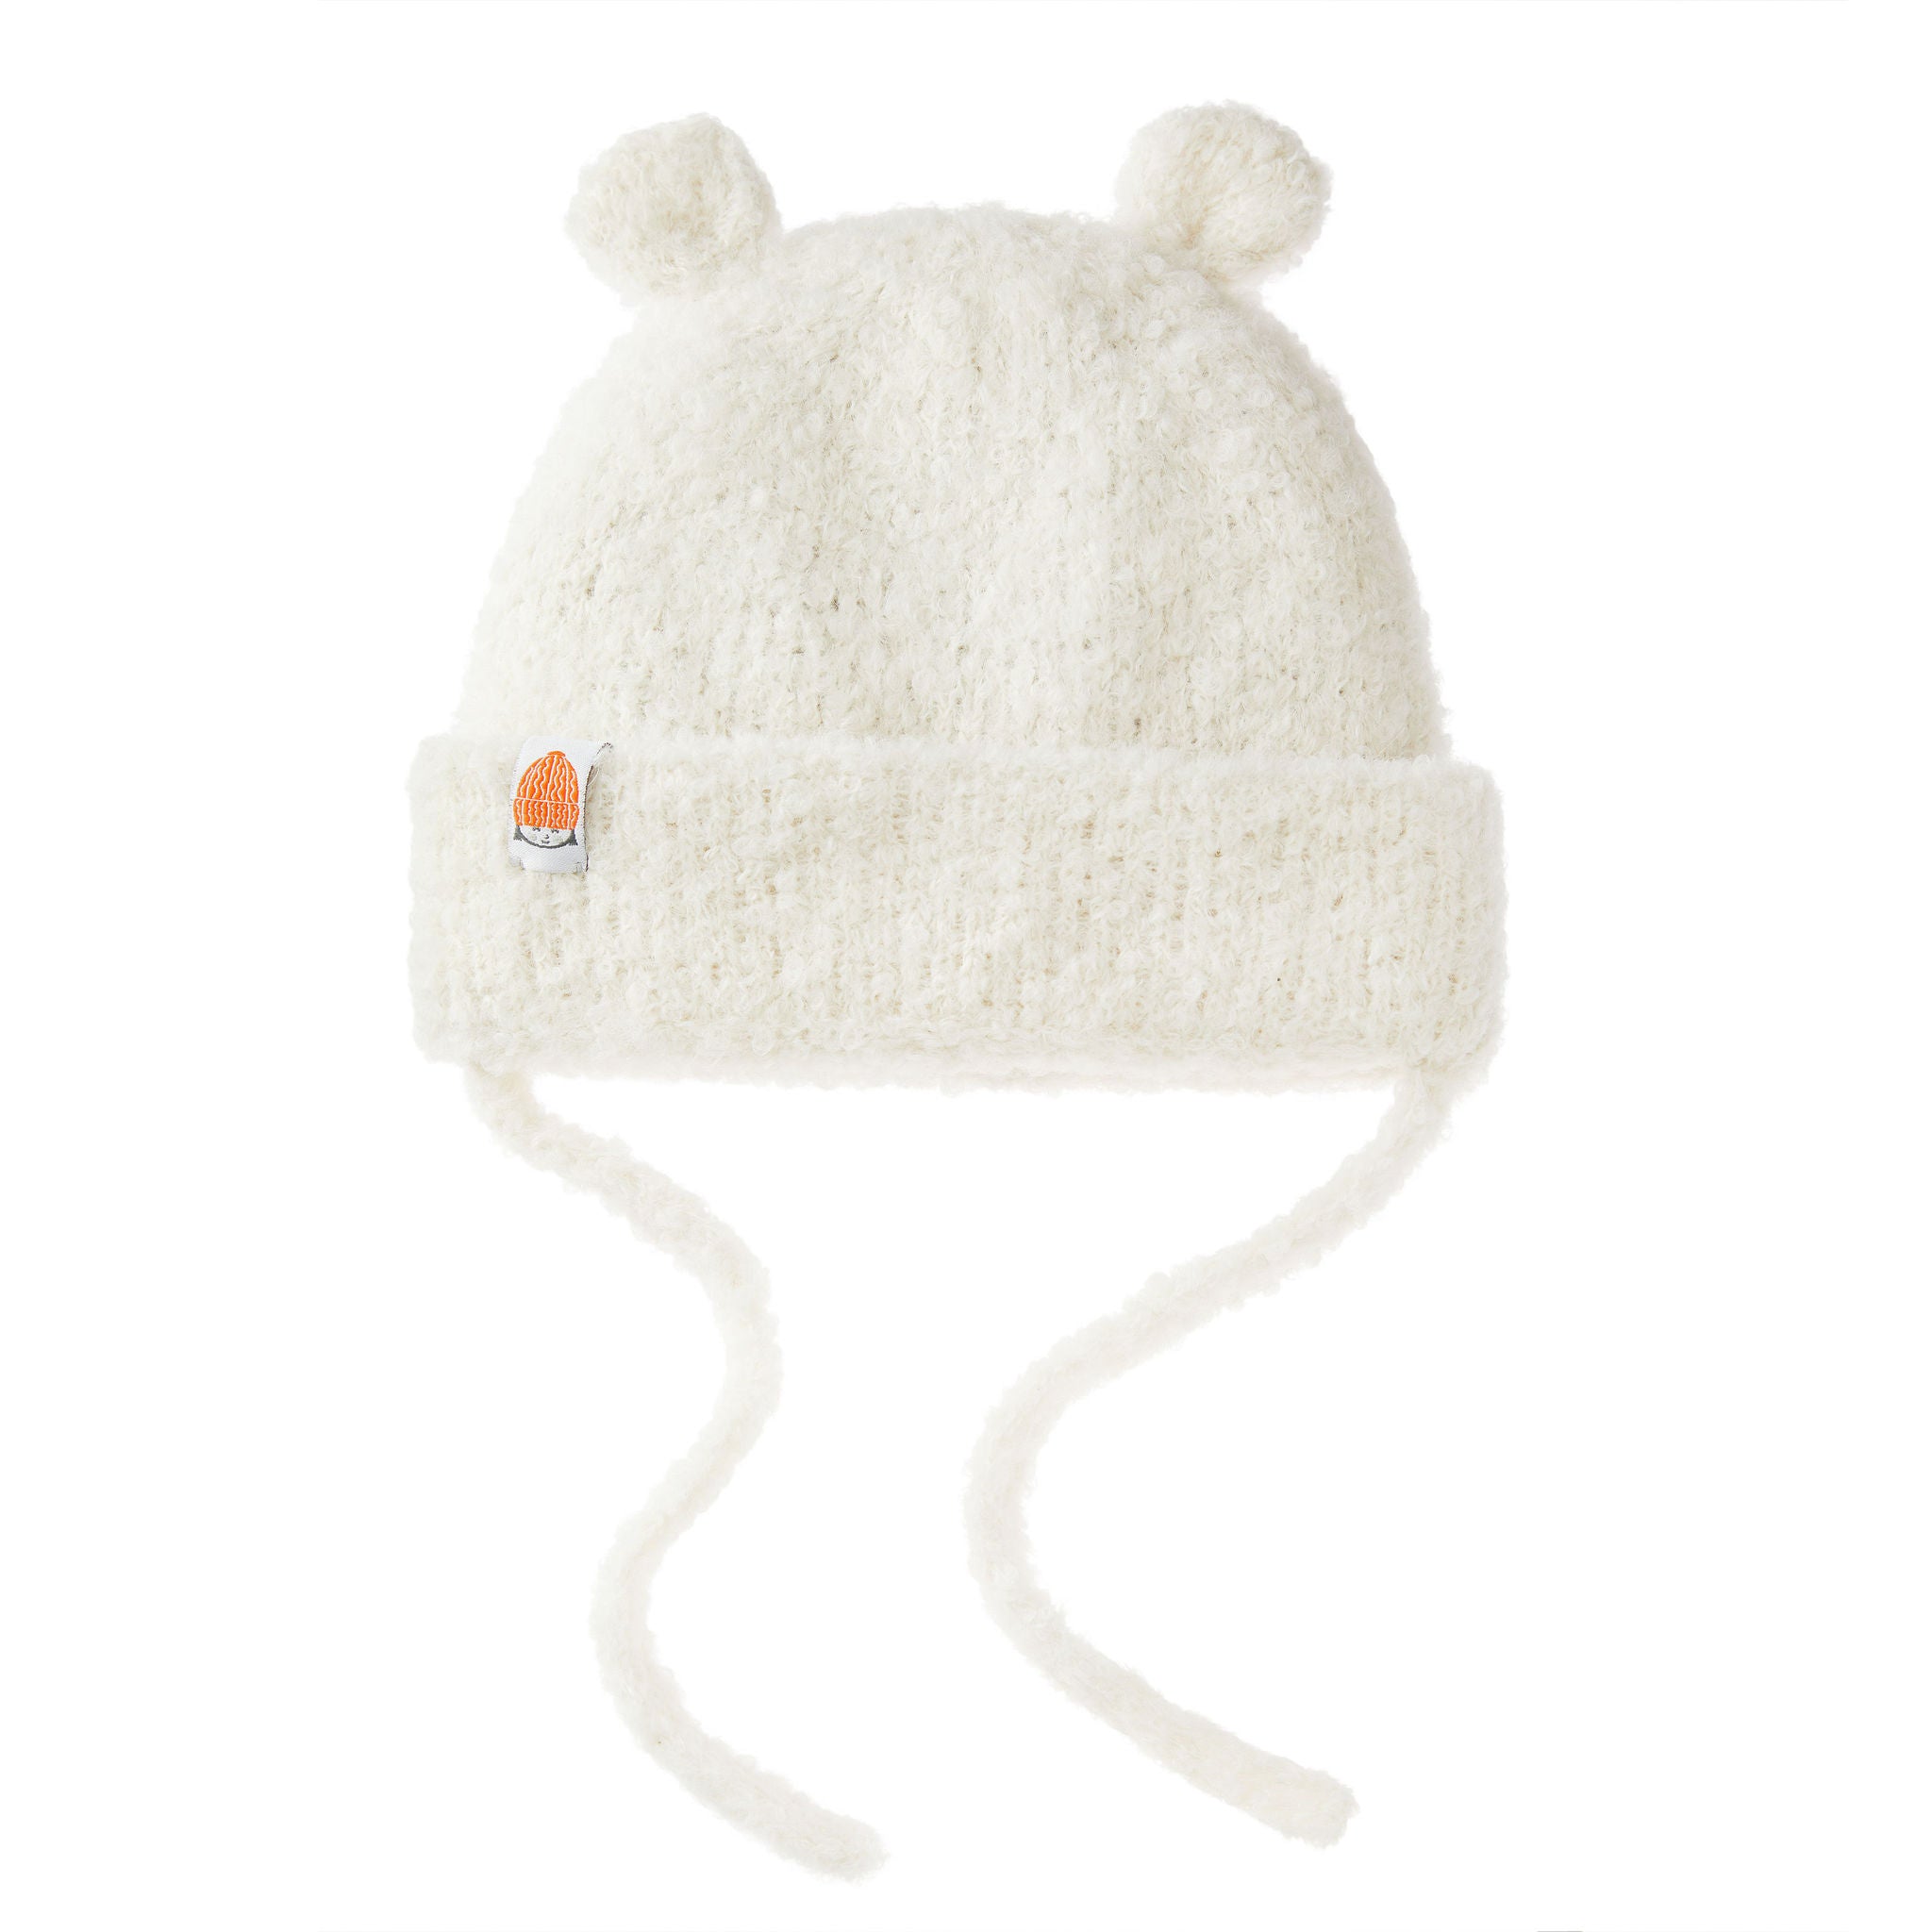 The Toddler Lil Teddy Beanie